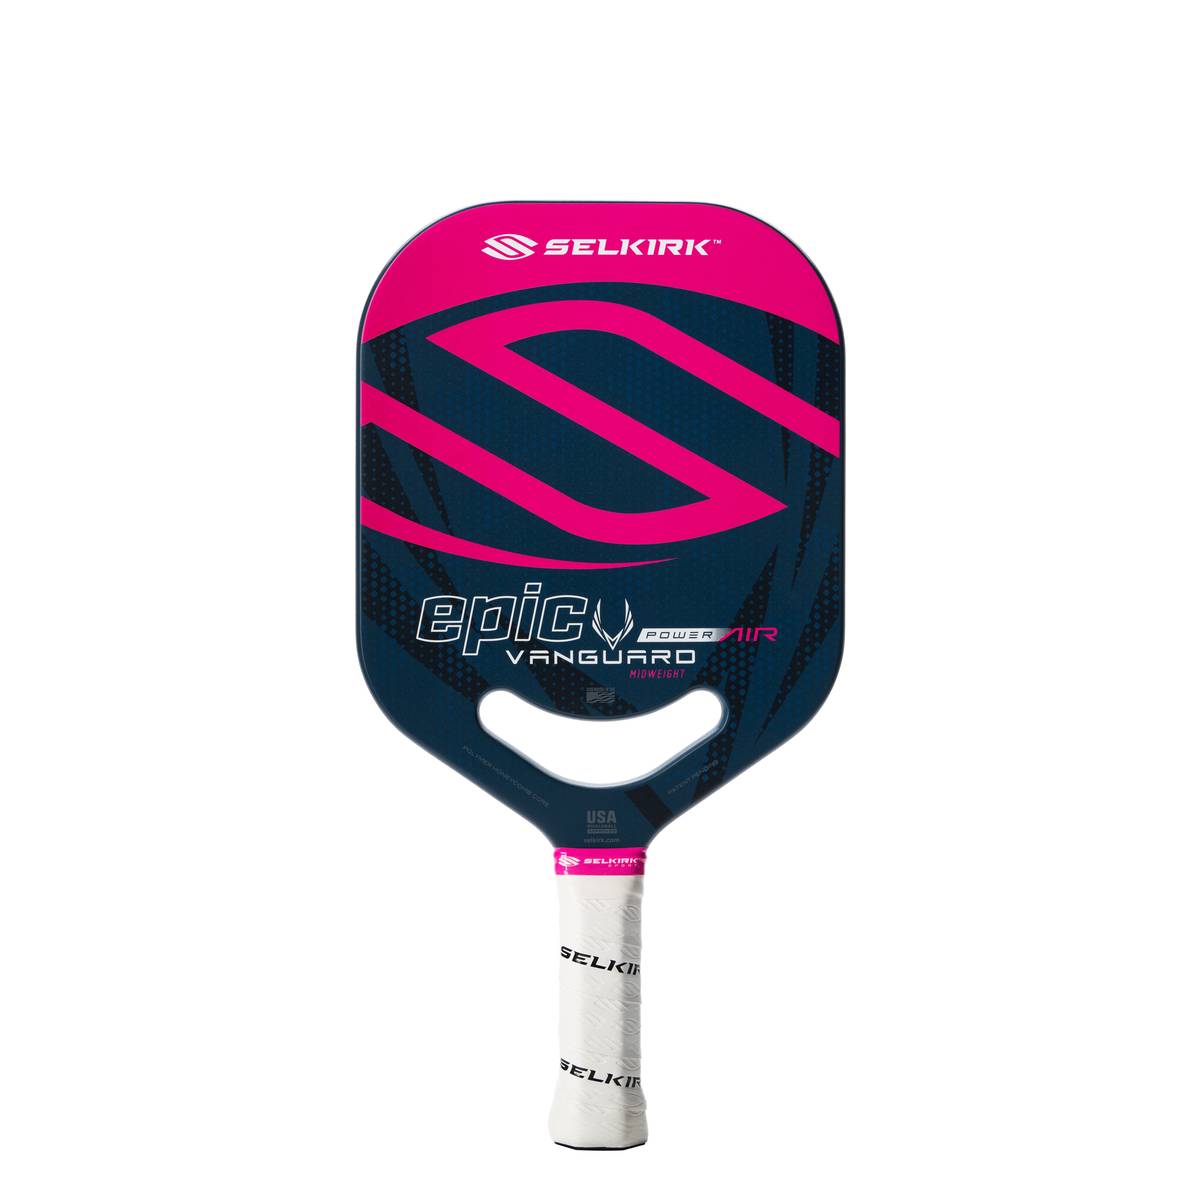 A Selkirk Power Air Epic Pickleball Paddle with a pink and black design.